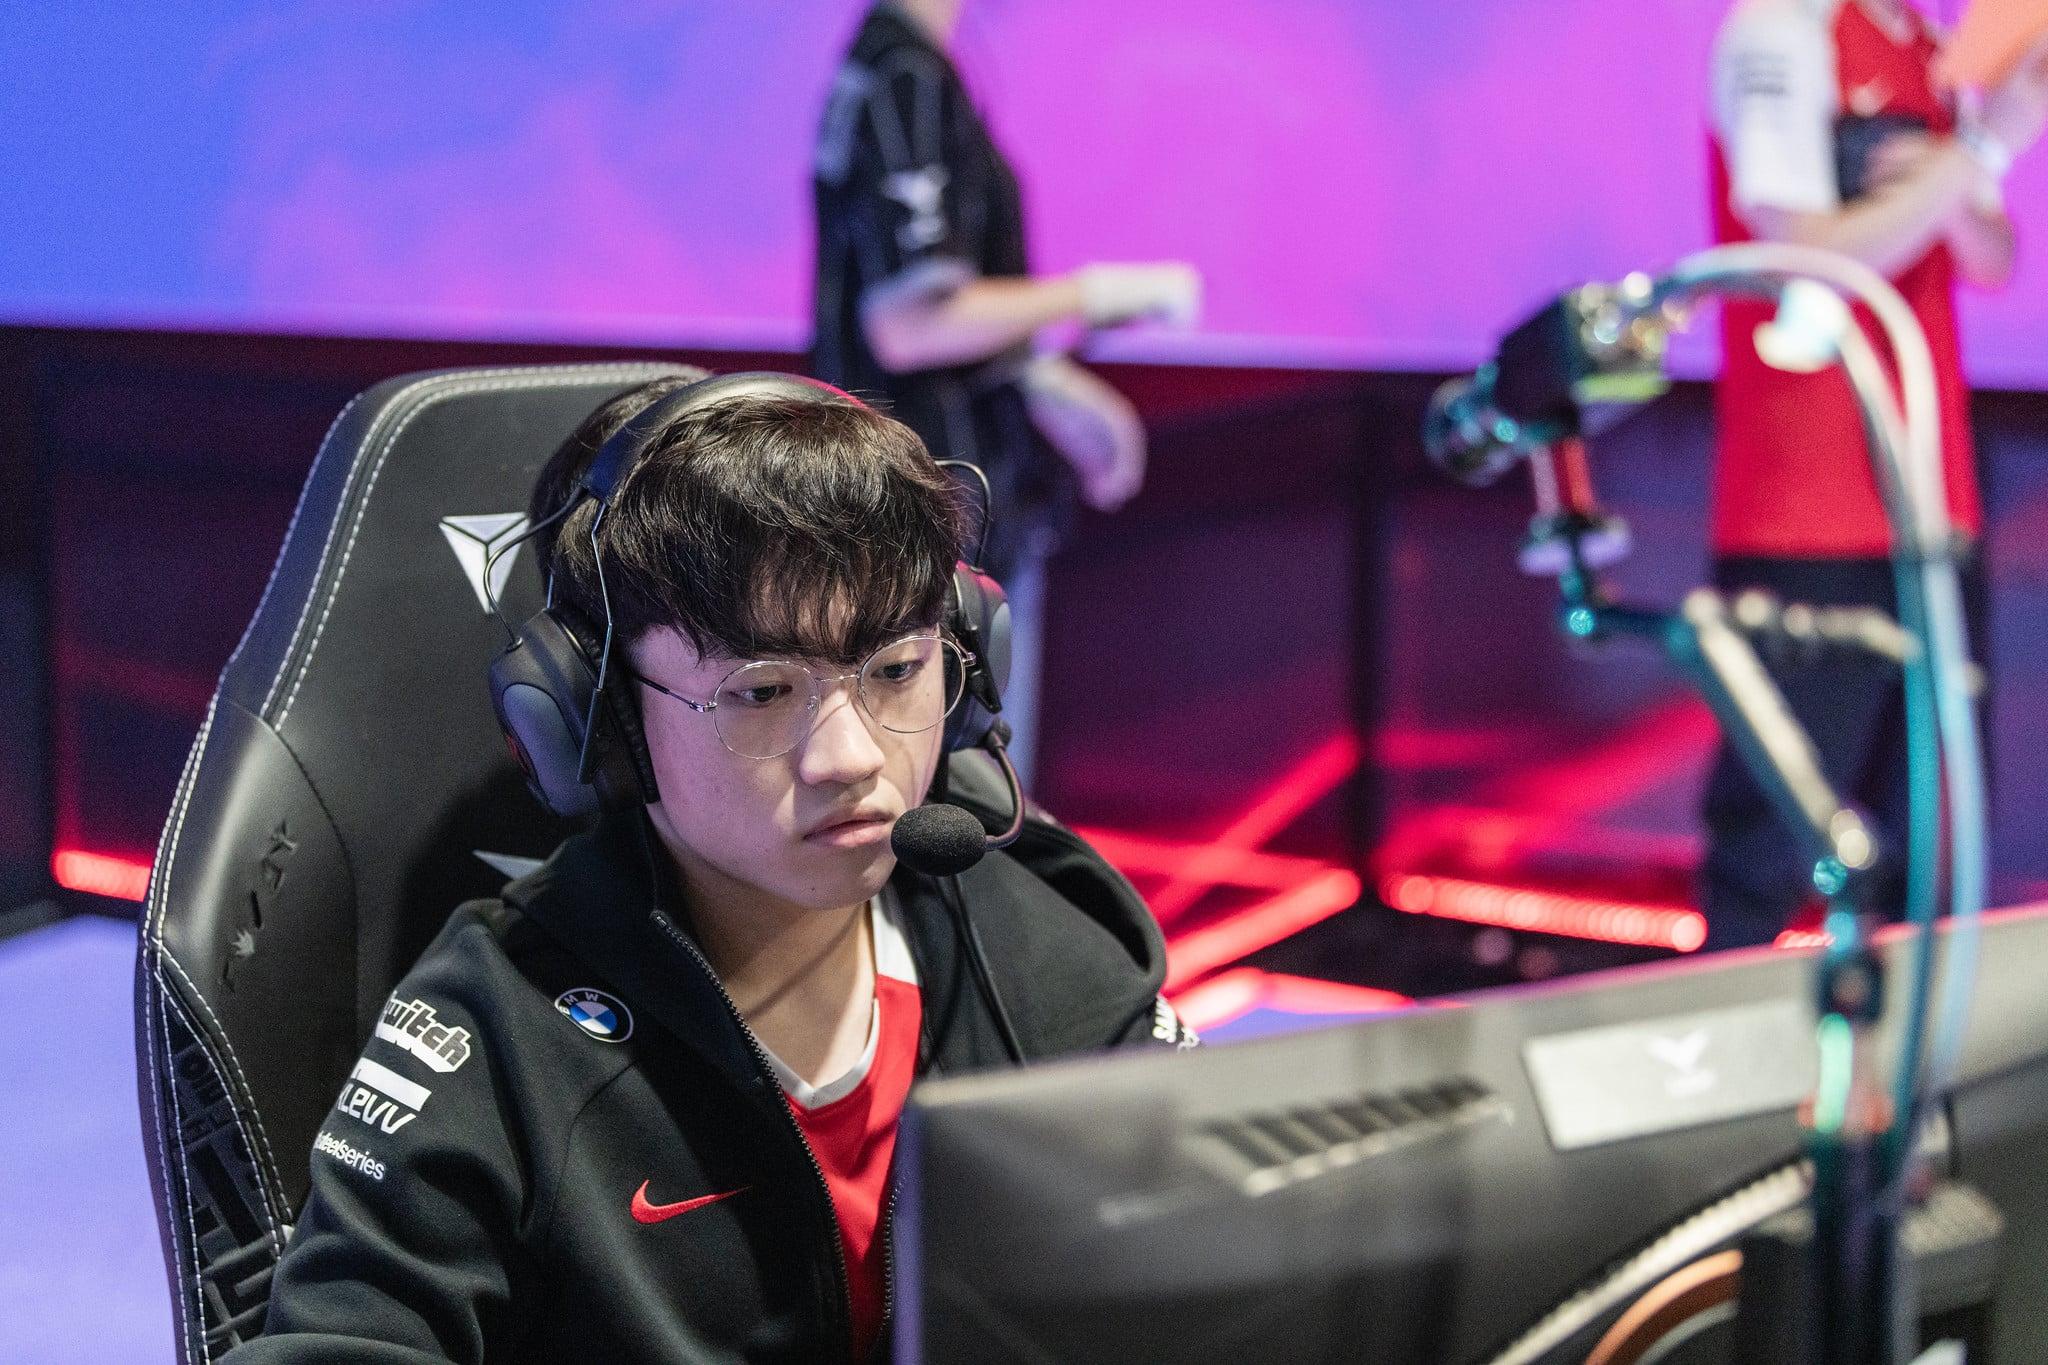 Keria playing for T1 at LCK Summer 2021